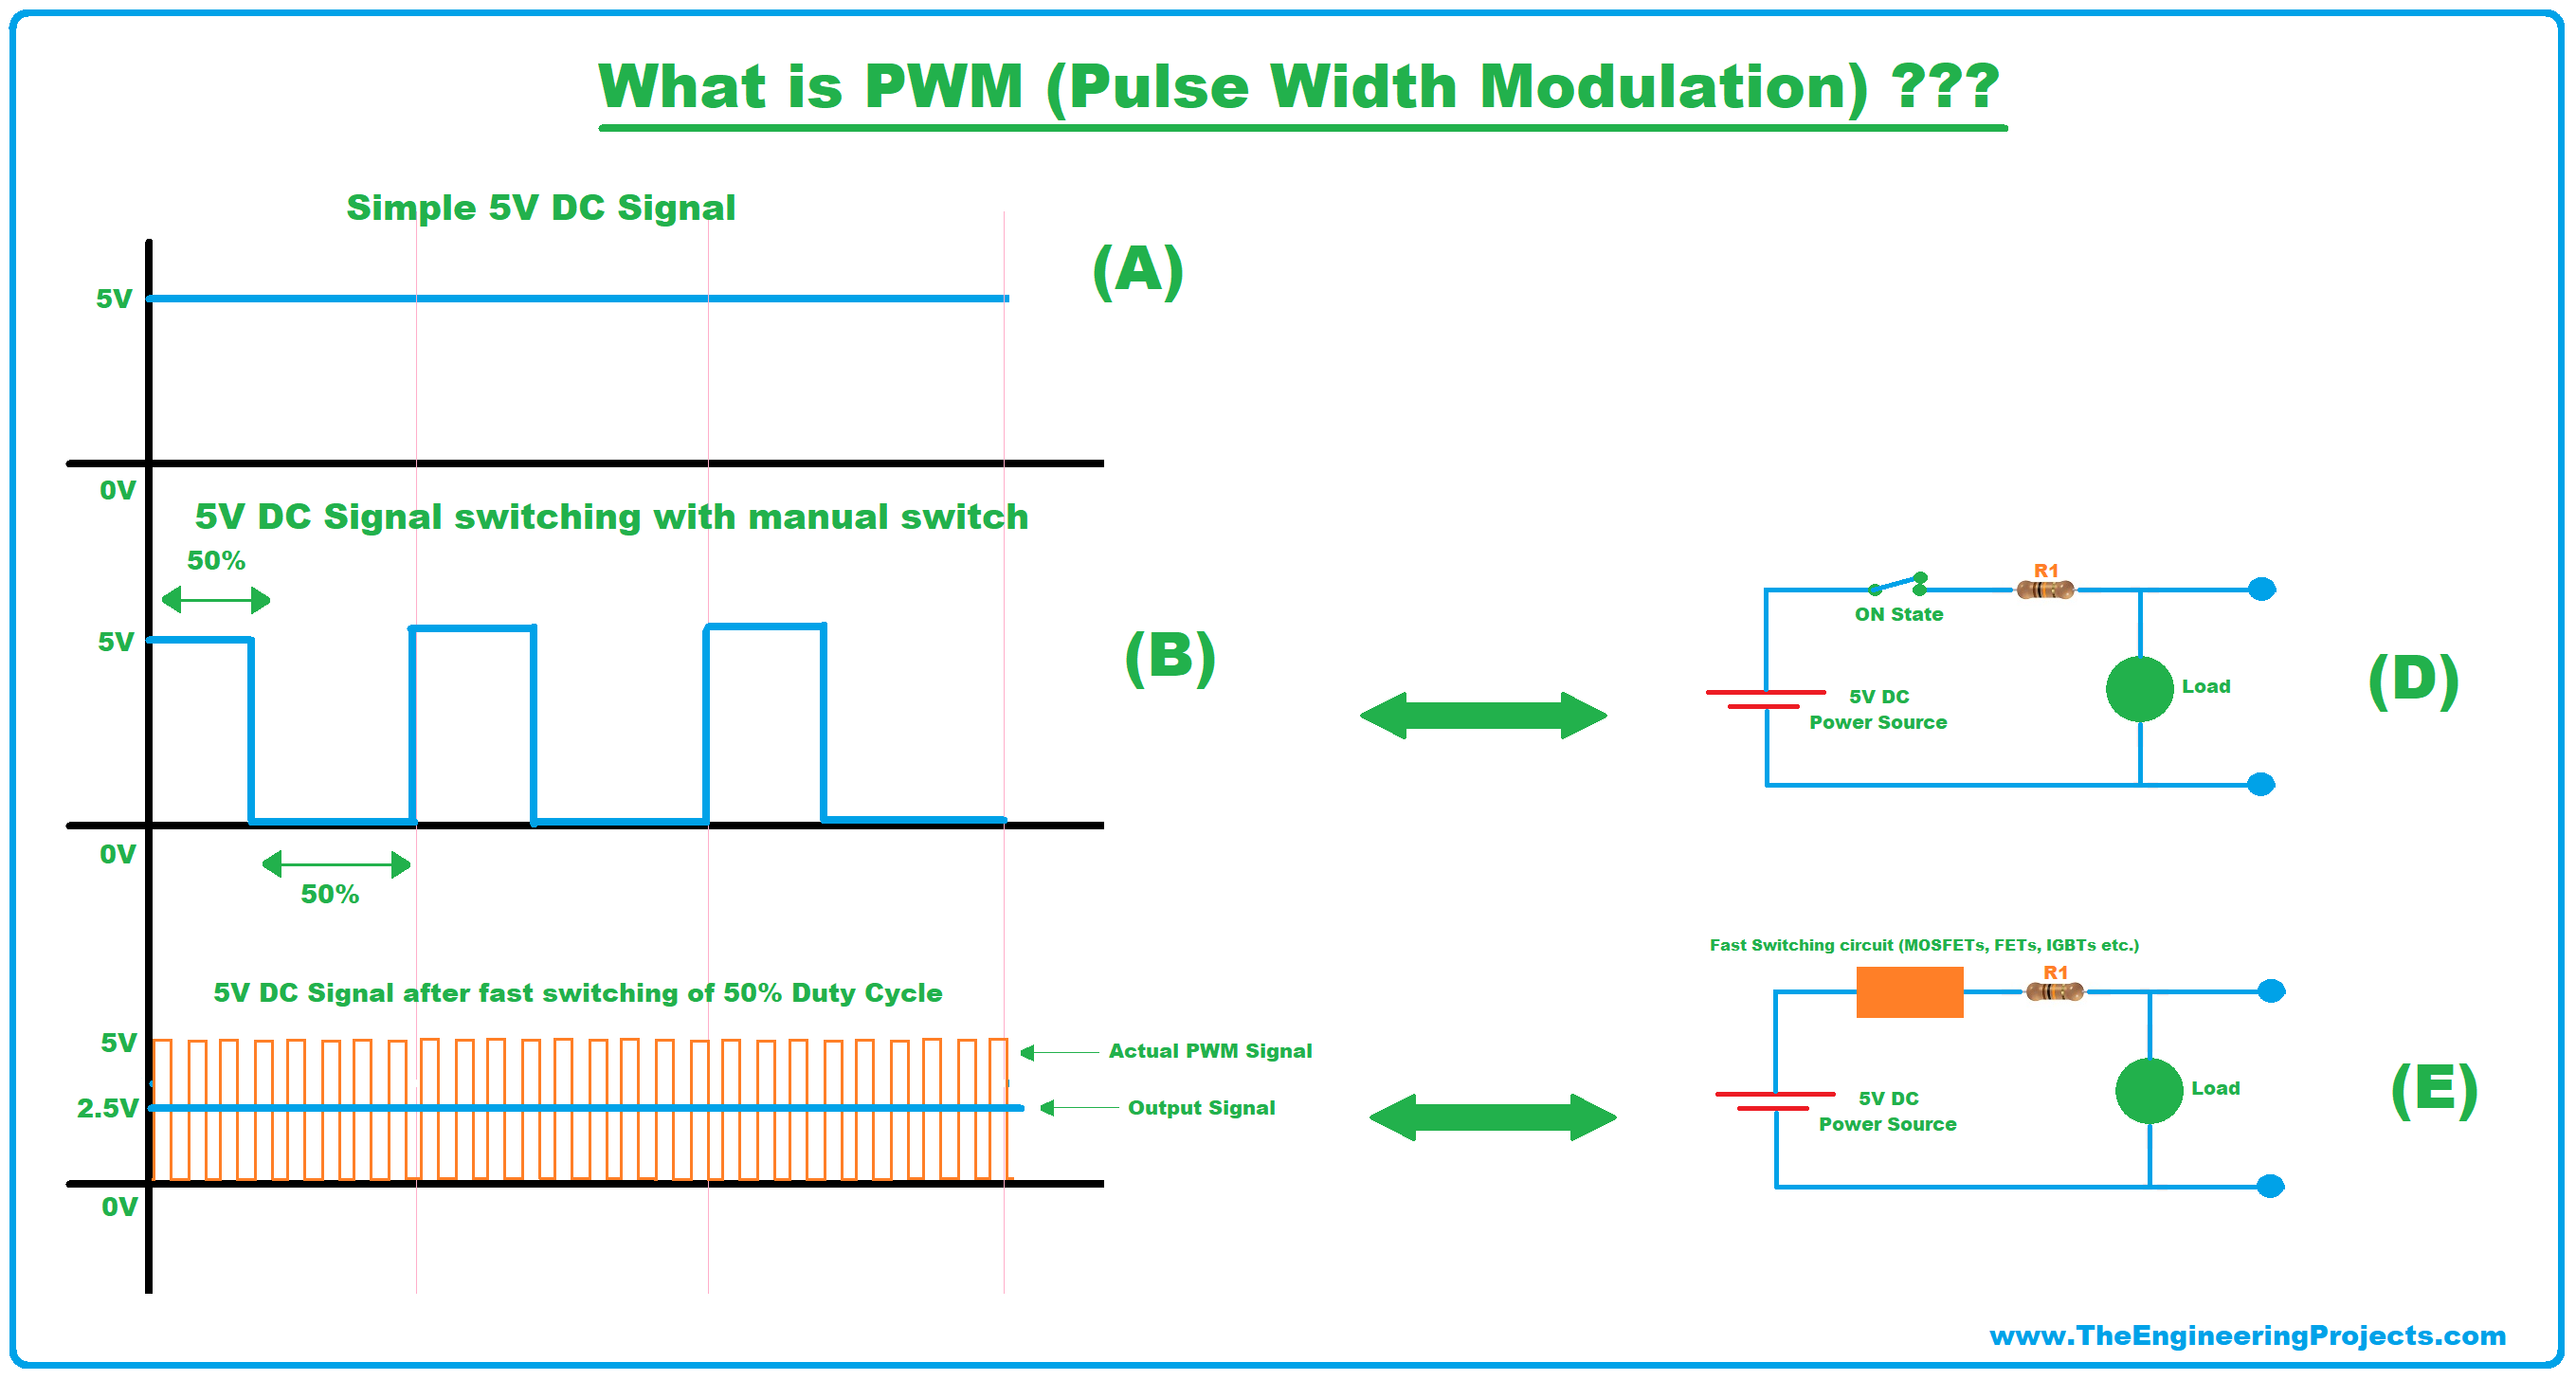 pwm, pulse width modulation, what is pwm what is pulse width modulation, pwm applications, duty cycle, pwm examples, pwm meaning, pwm circuit